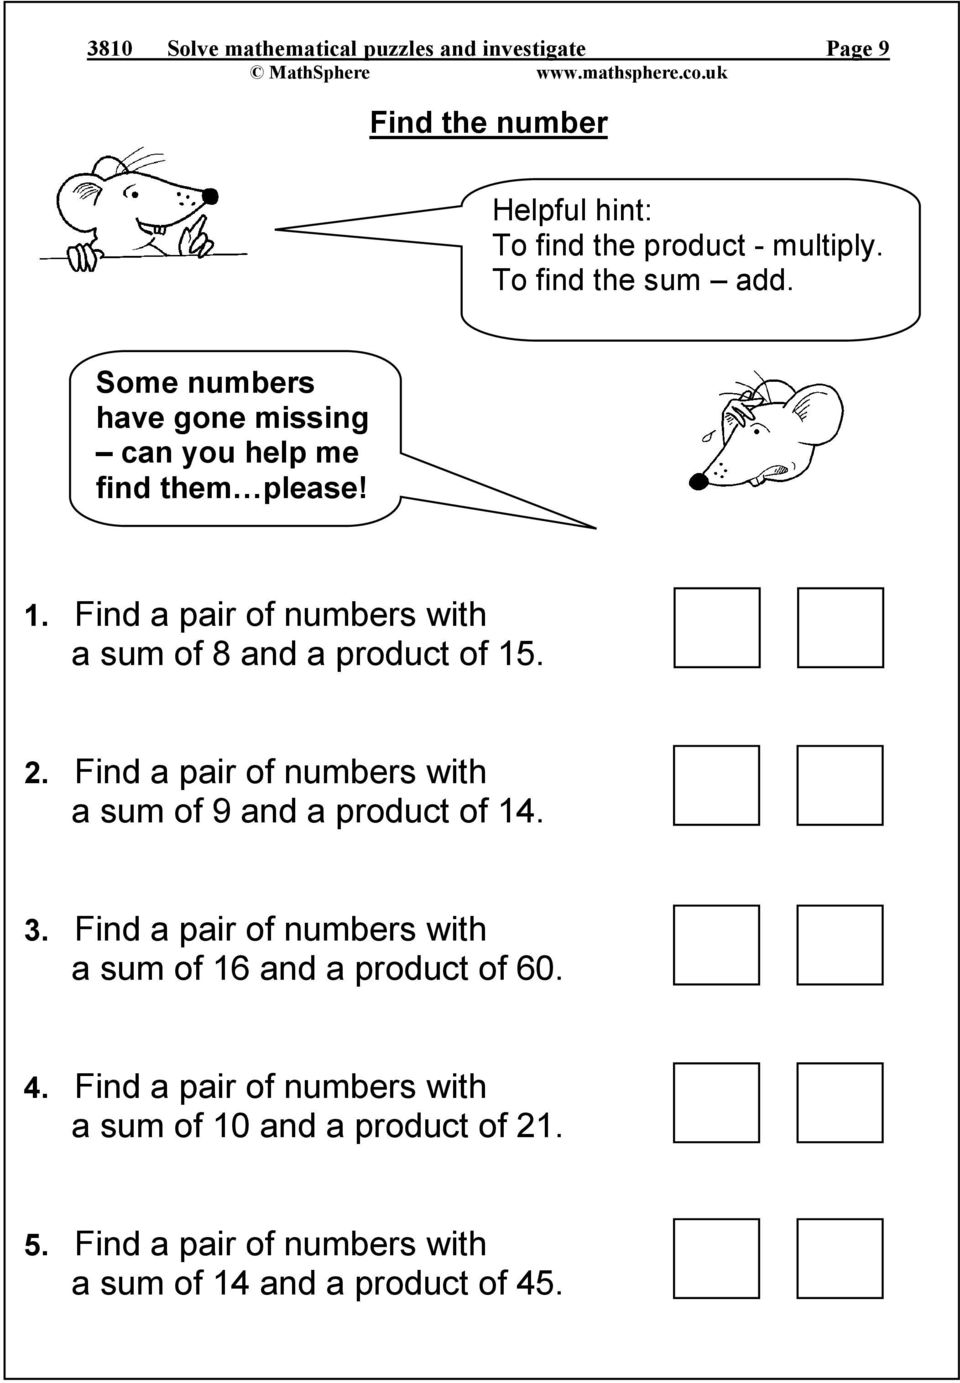 Find a pair of numbers with a sum of 8 and a product of 15. 2. Find a pair of numbers with a sum of 9 and a product of 14. 3.